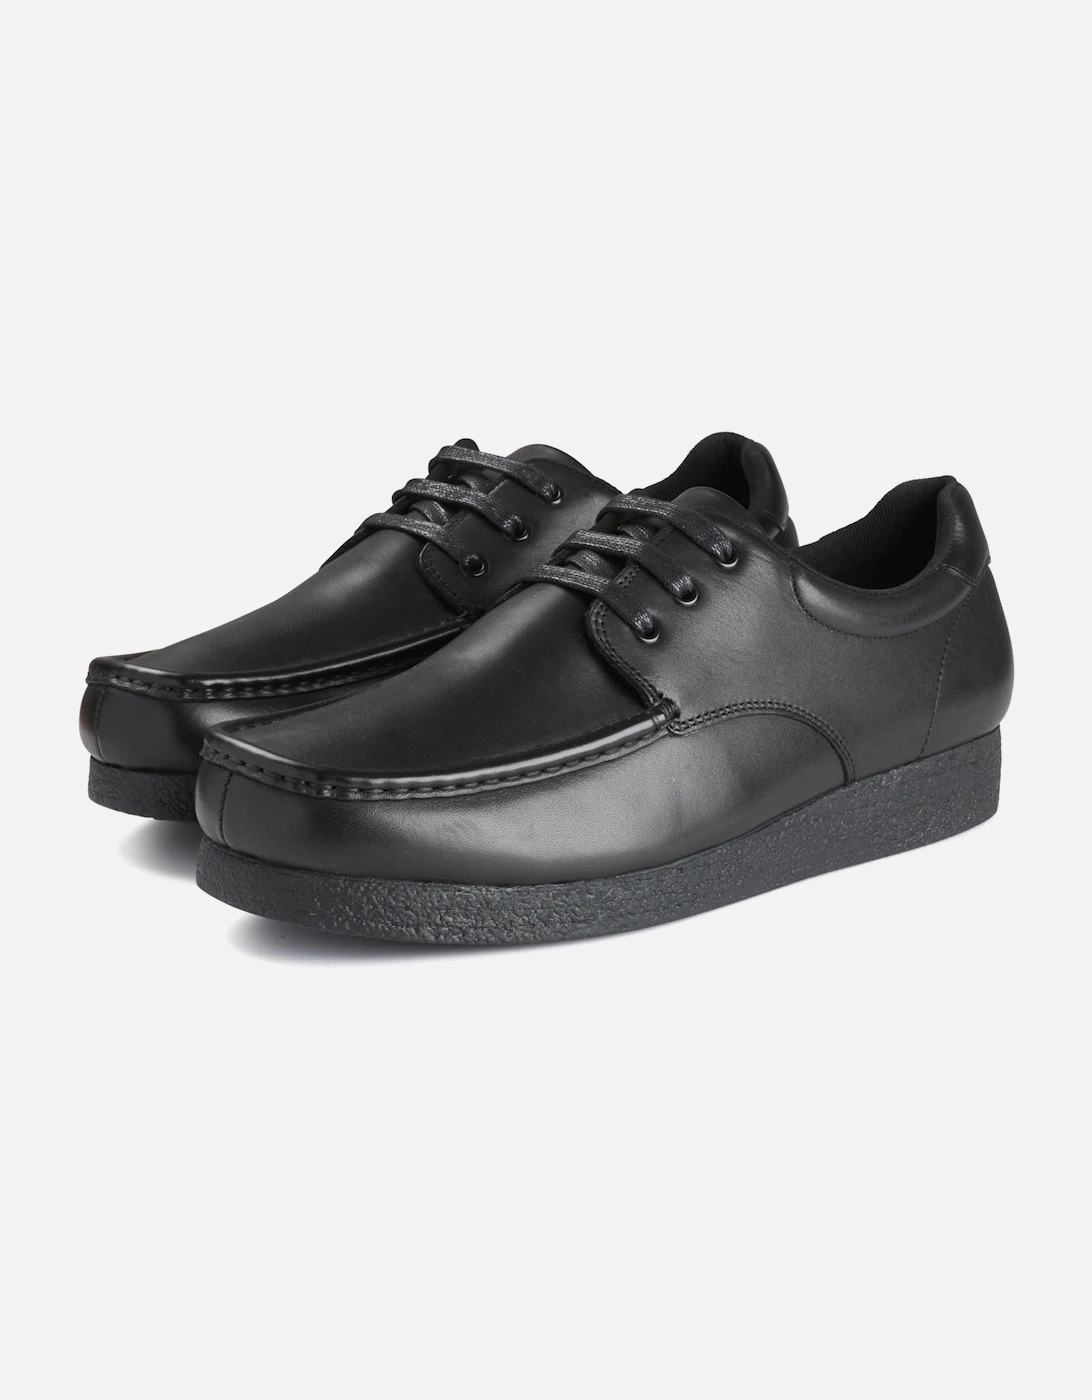 Youths Academy Shoes (Black)